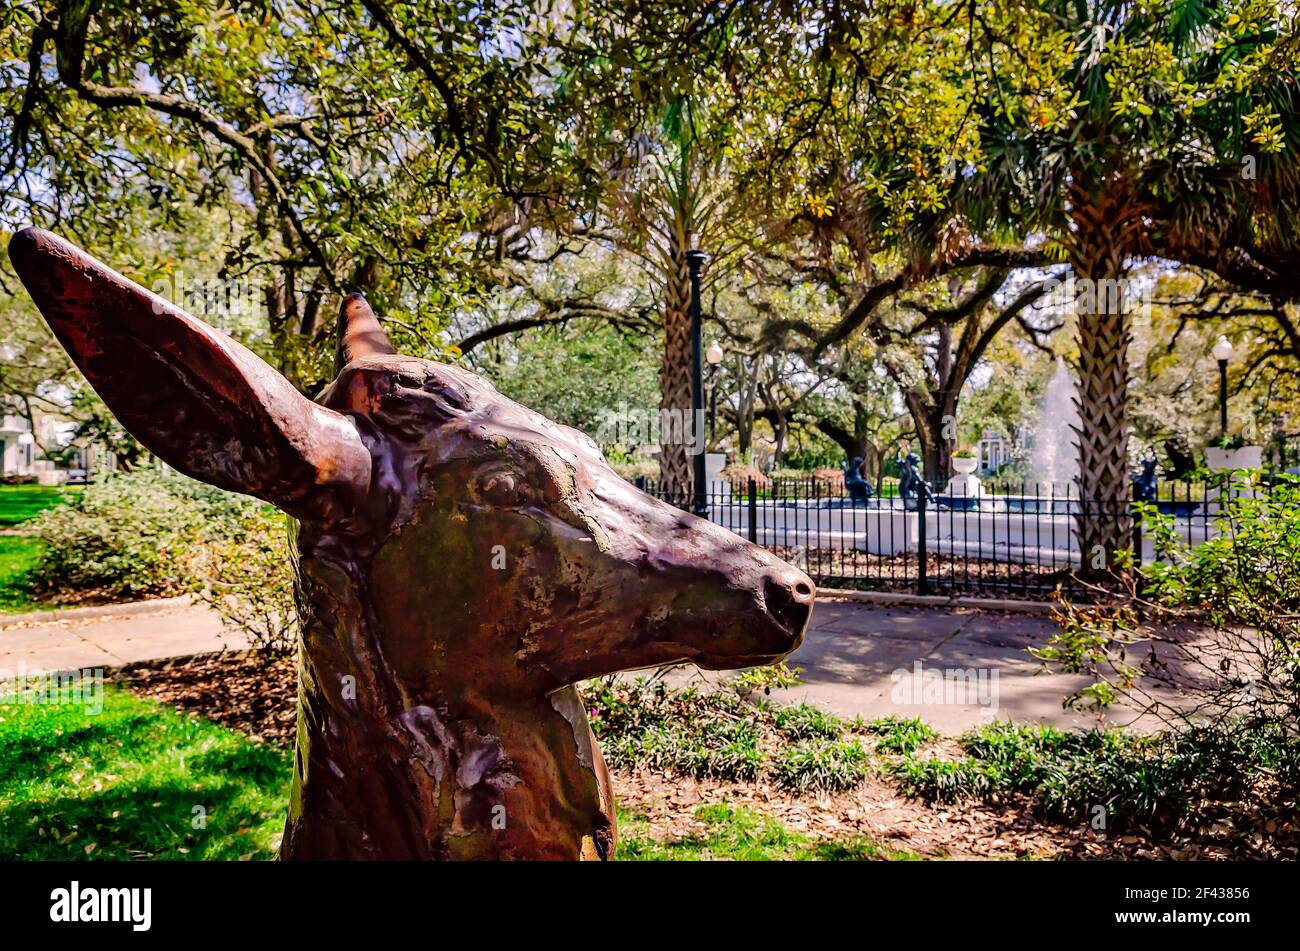 A deer statue stands in Washington Square in Mobile, Alabama. Washington Square is a picturesque park located in the Oakleigh Garden Historic District. Stock Photo